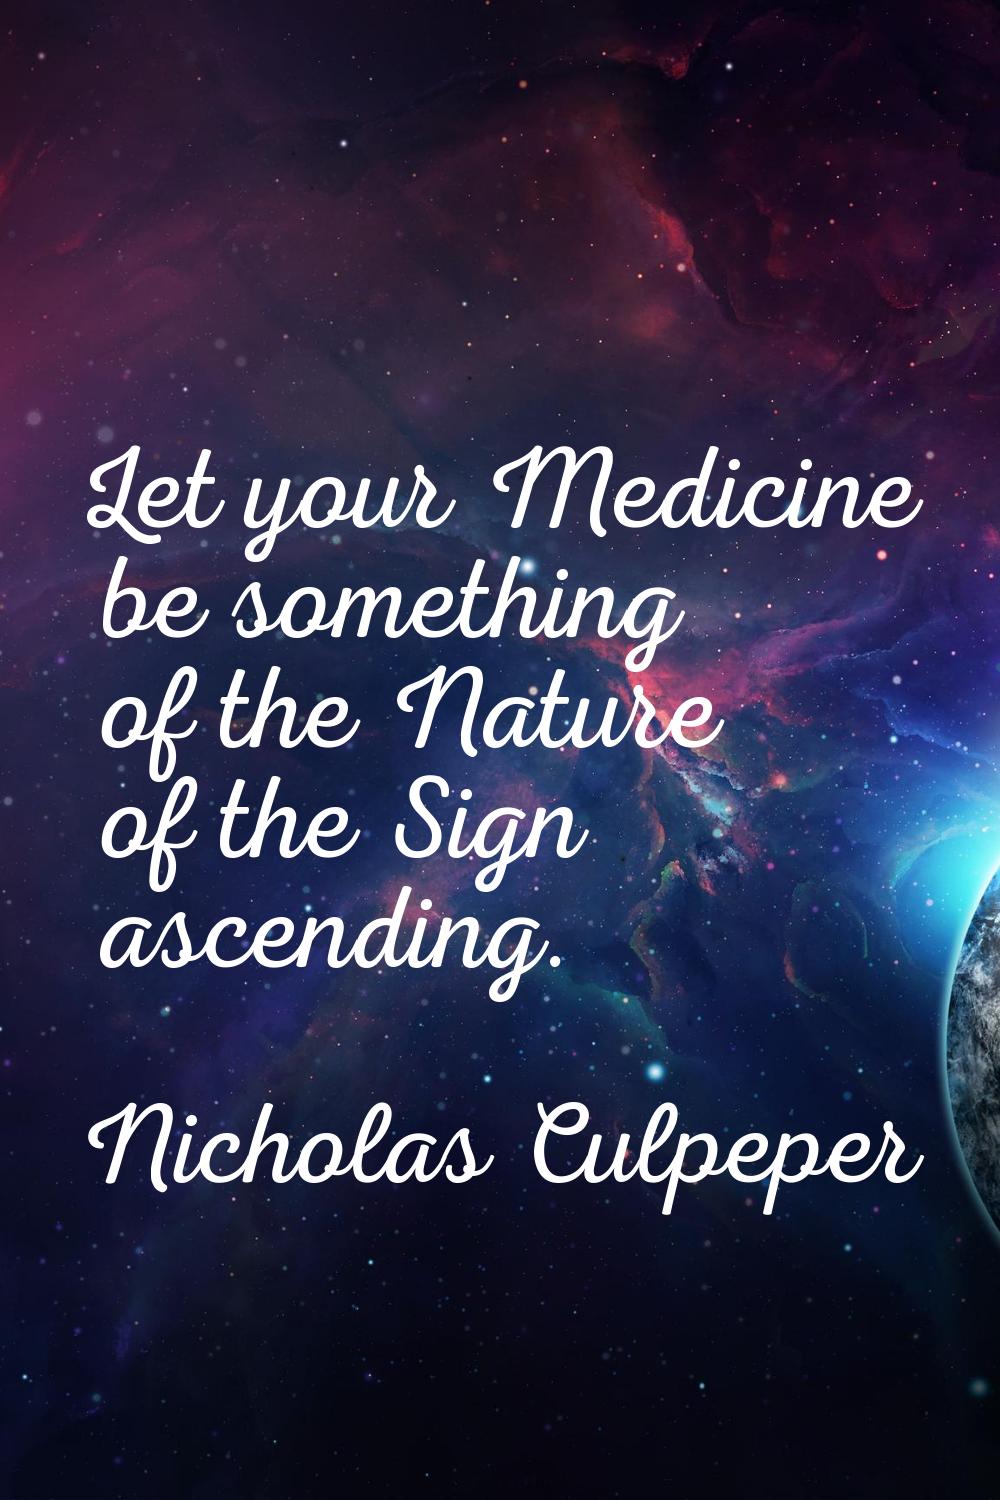 Let your Medicine be something of the Nature of the Sign ascending.